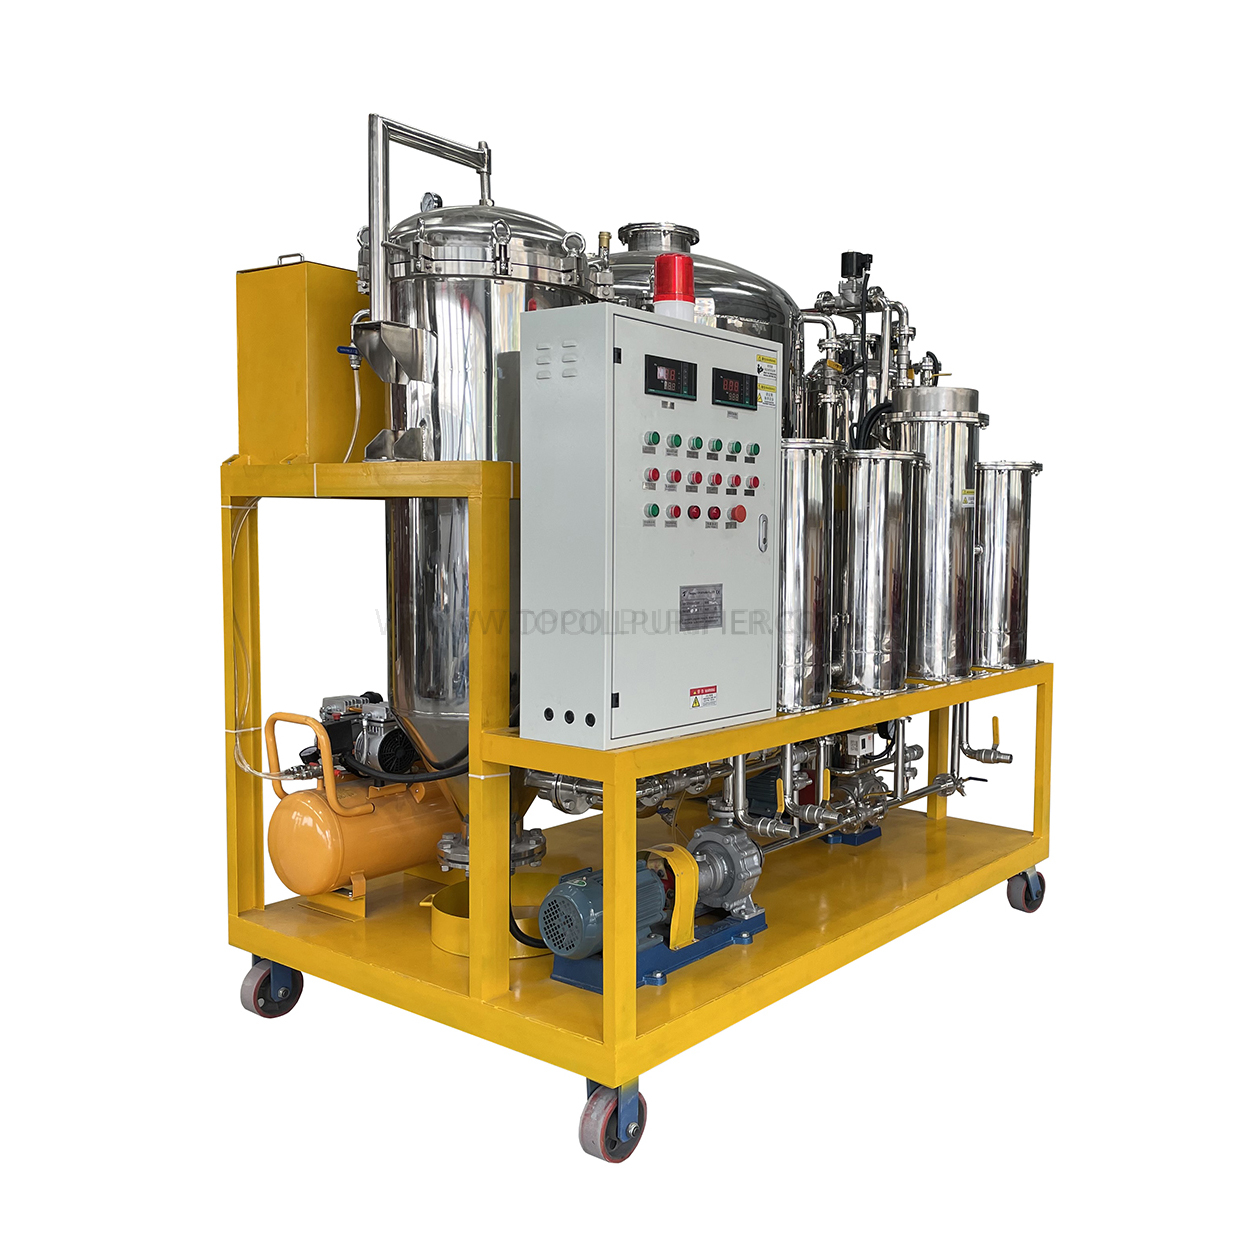 TYS Food Grade Stainless Steel Oil Purification at Decoloration Equipment